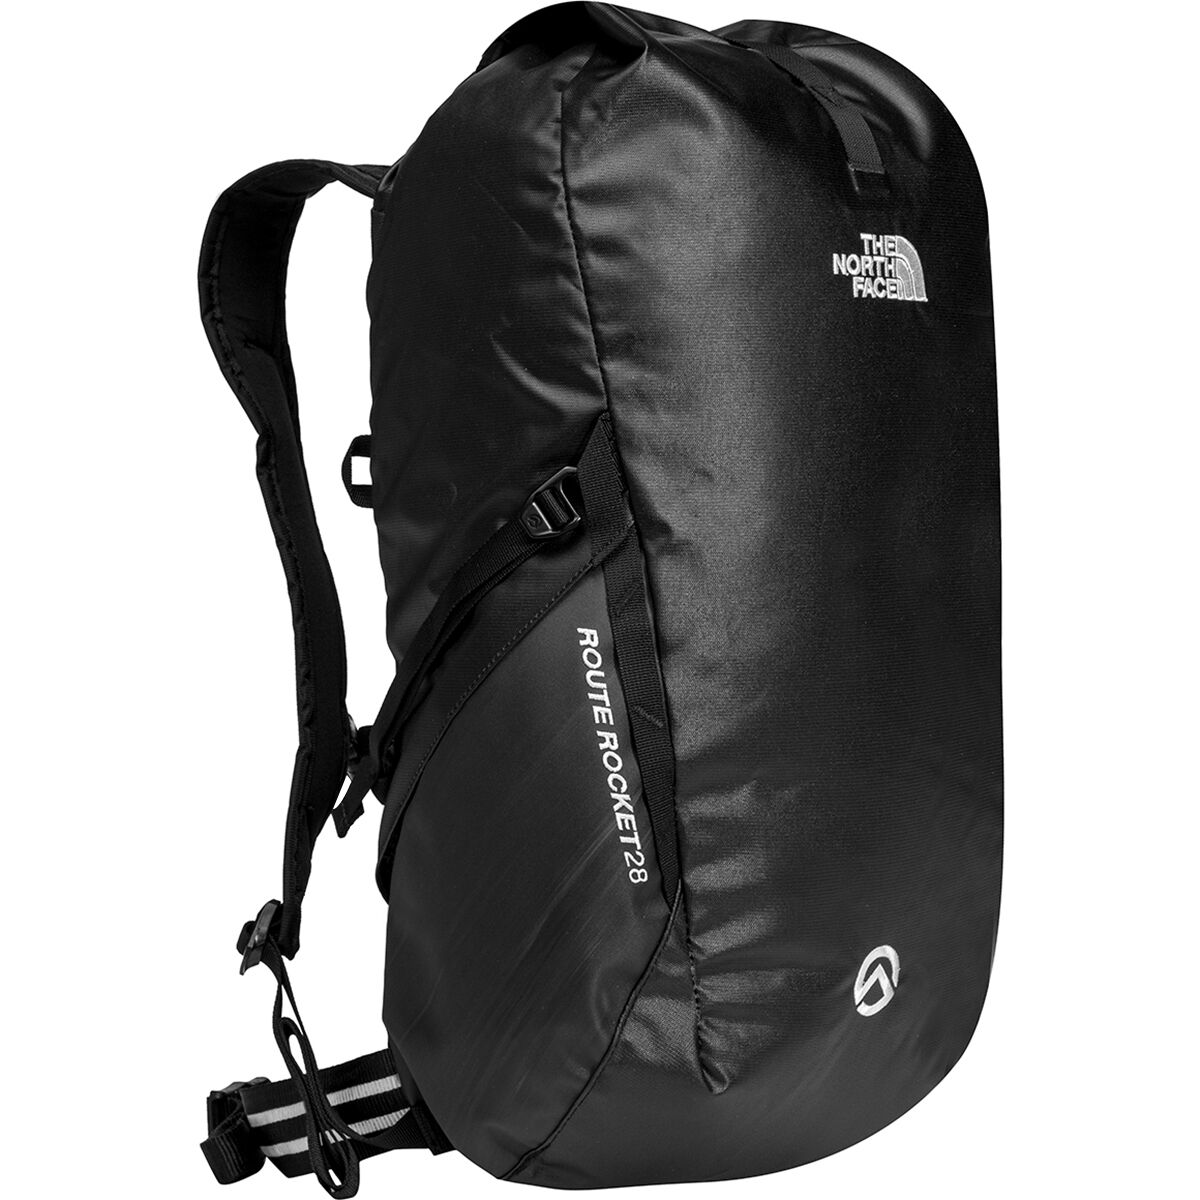 The North Face Route Rocket 28L Daypack